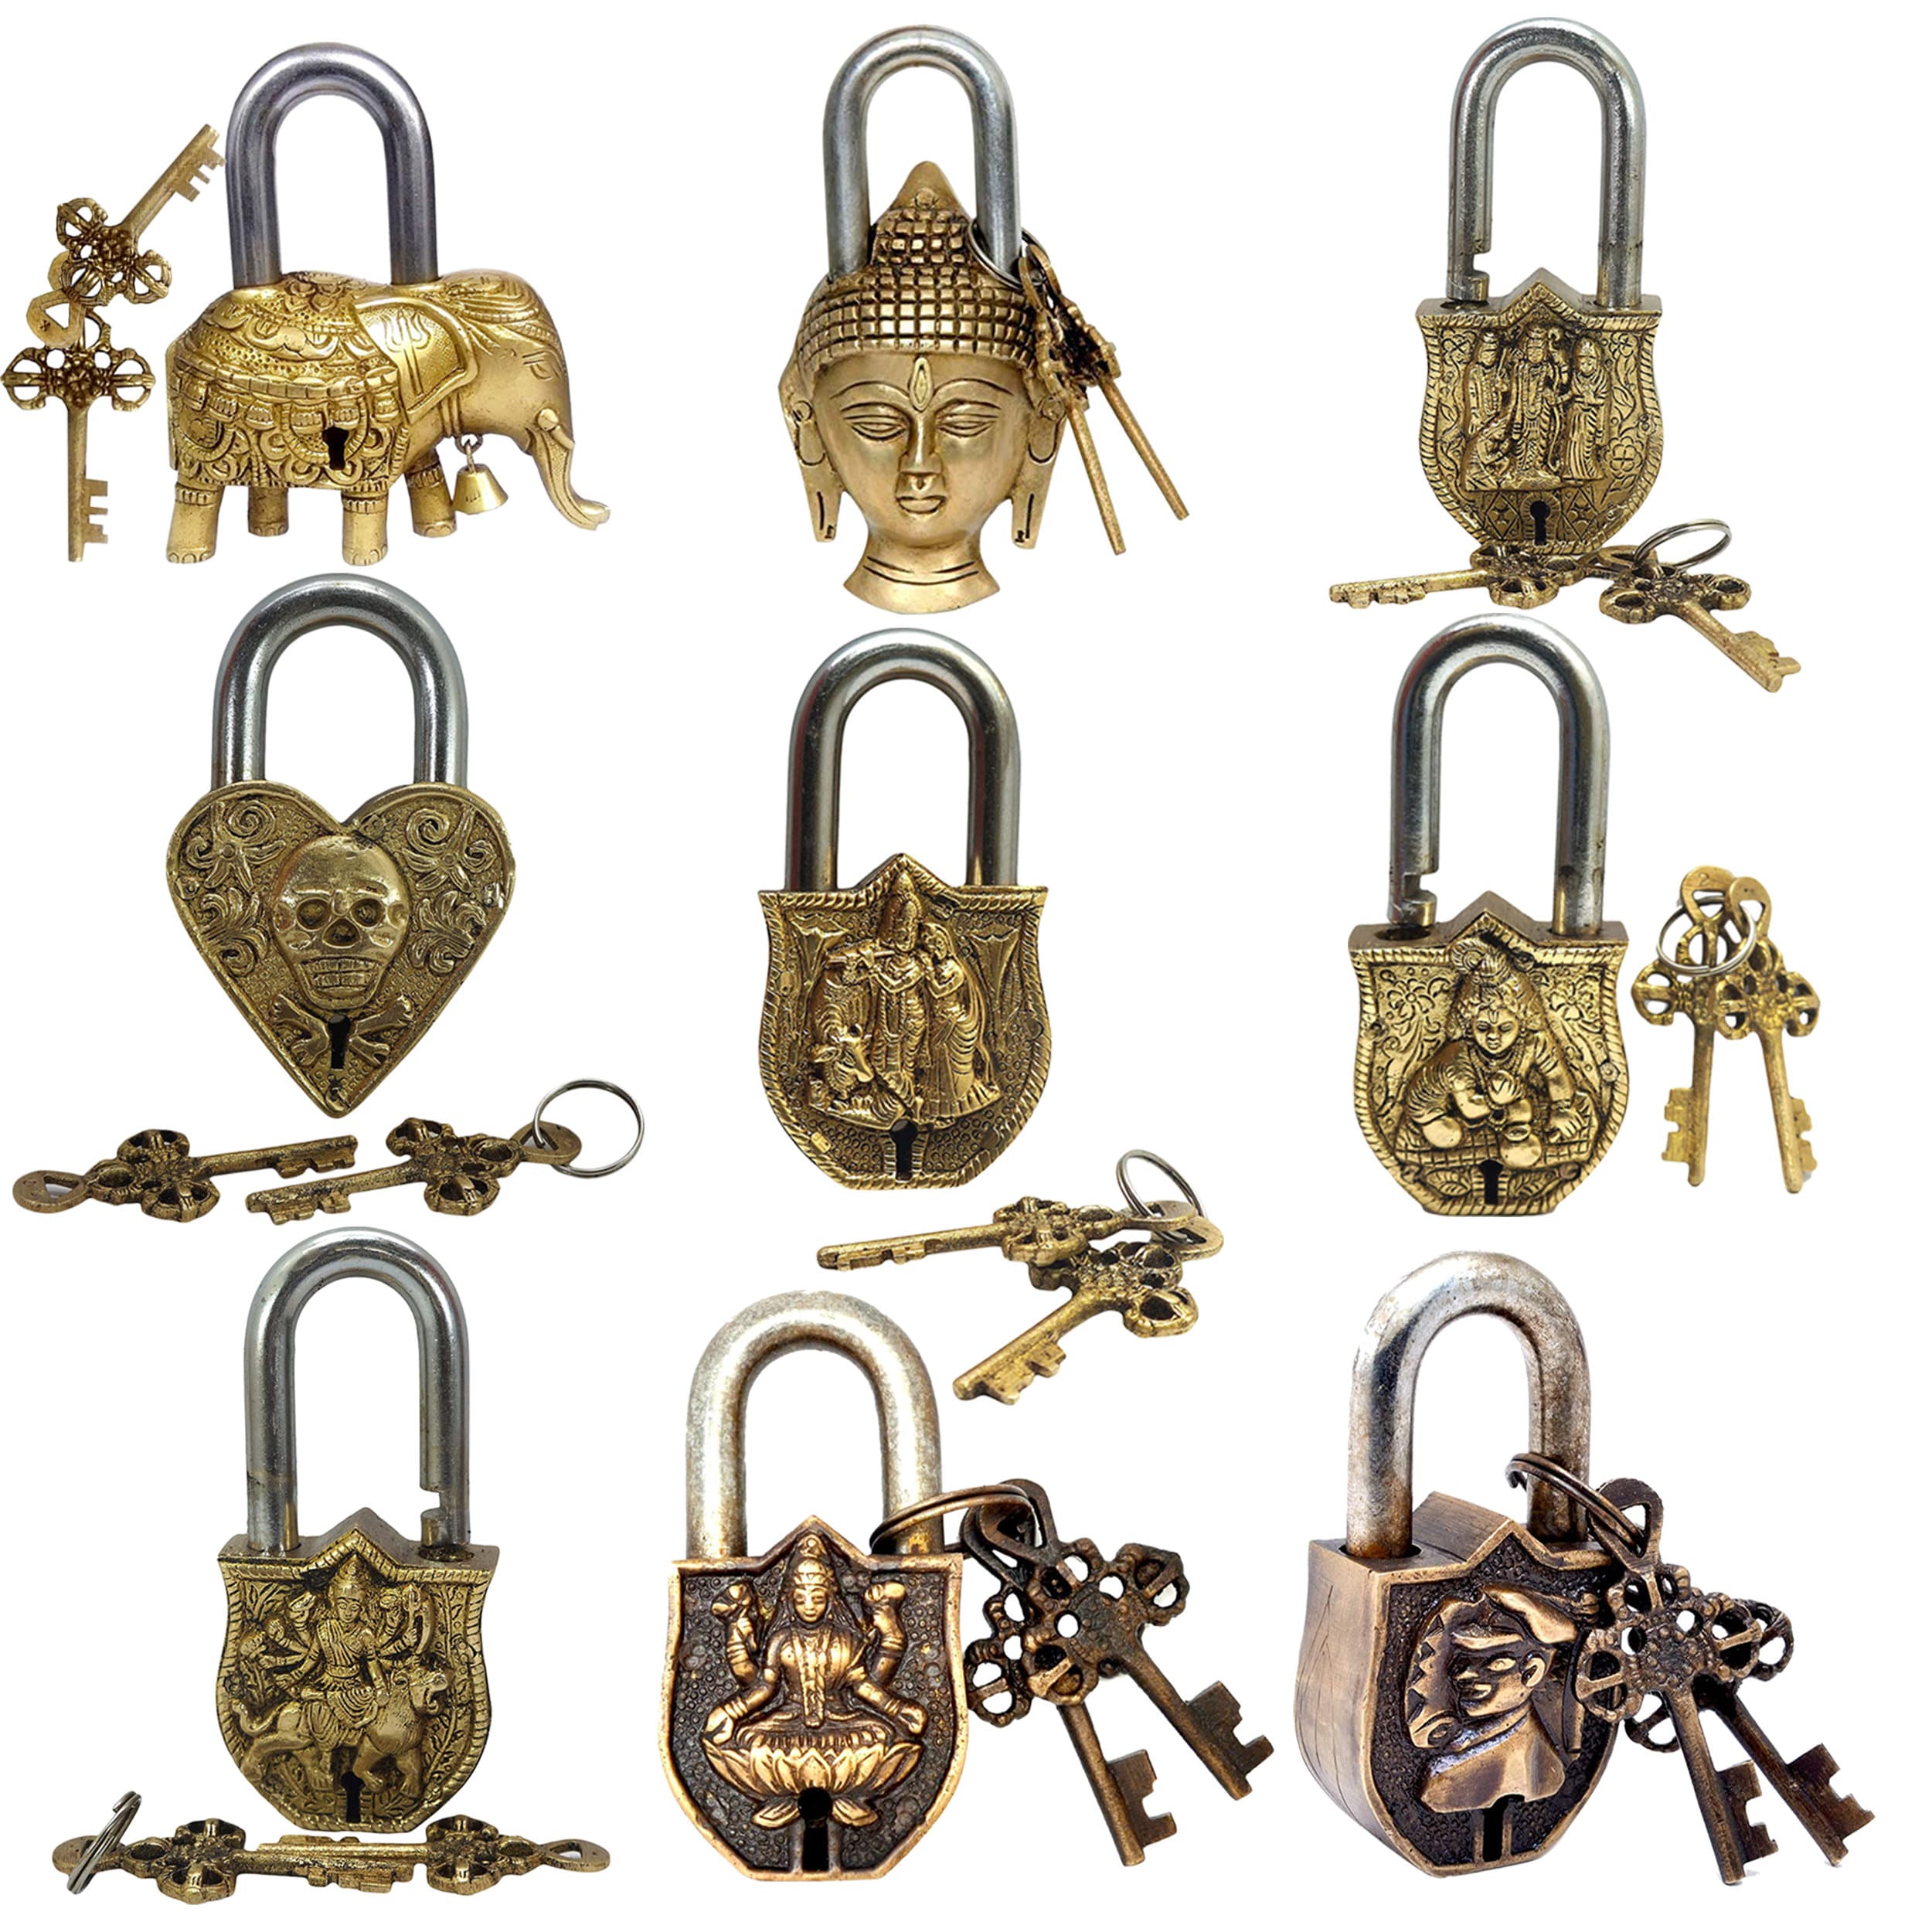 Brass Padlock Unique Home Gate Locks Lock With Key Security